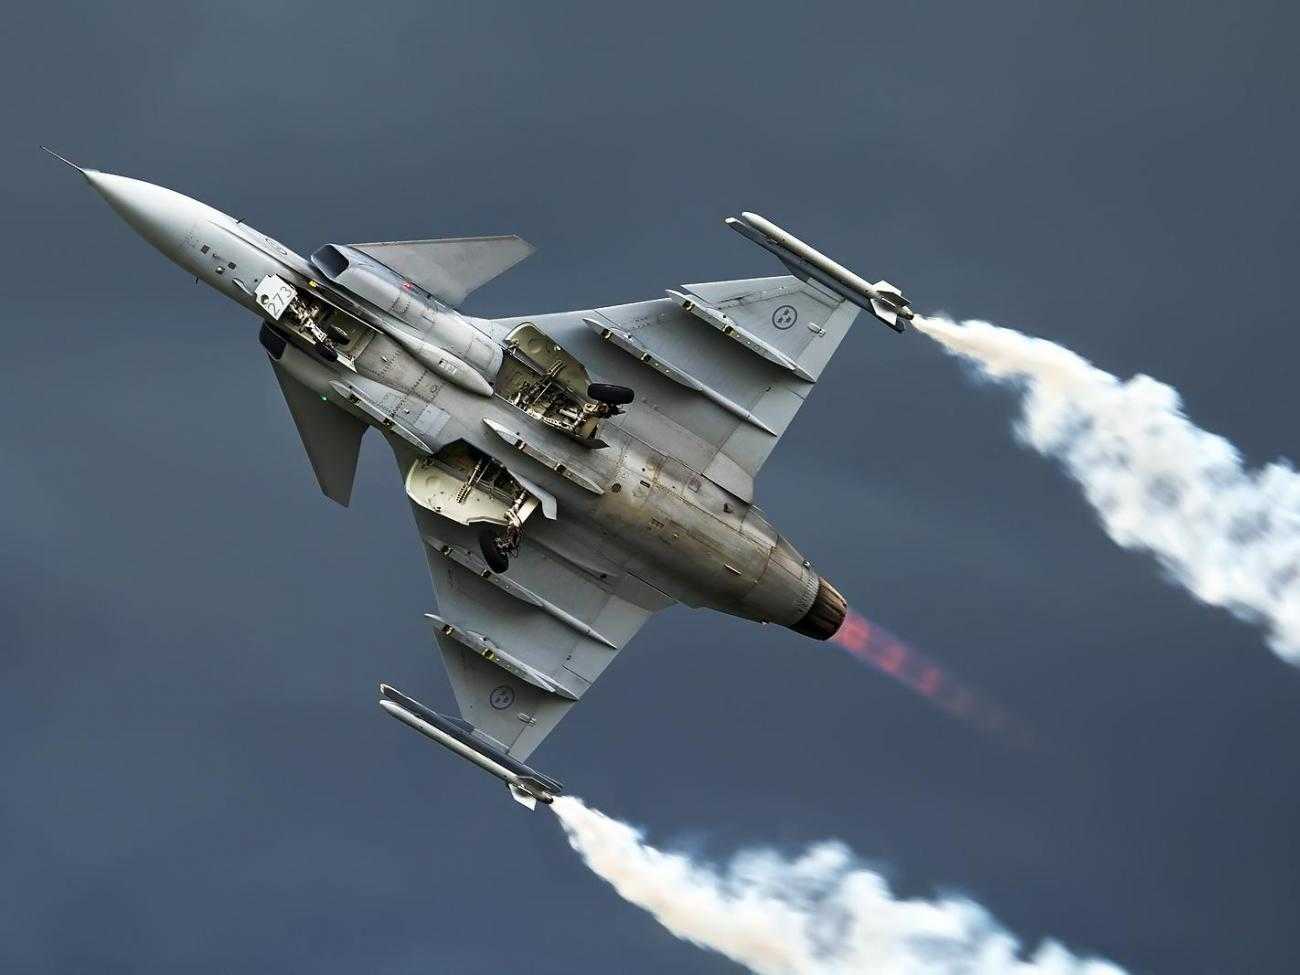 A fighter aircraft in the air during a display. The image is shot from below, and the aircraft has plumes of smoke trailing from the tip of each wing.